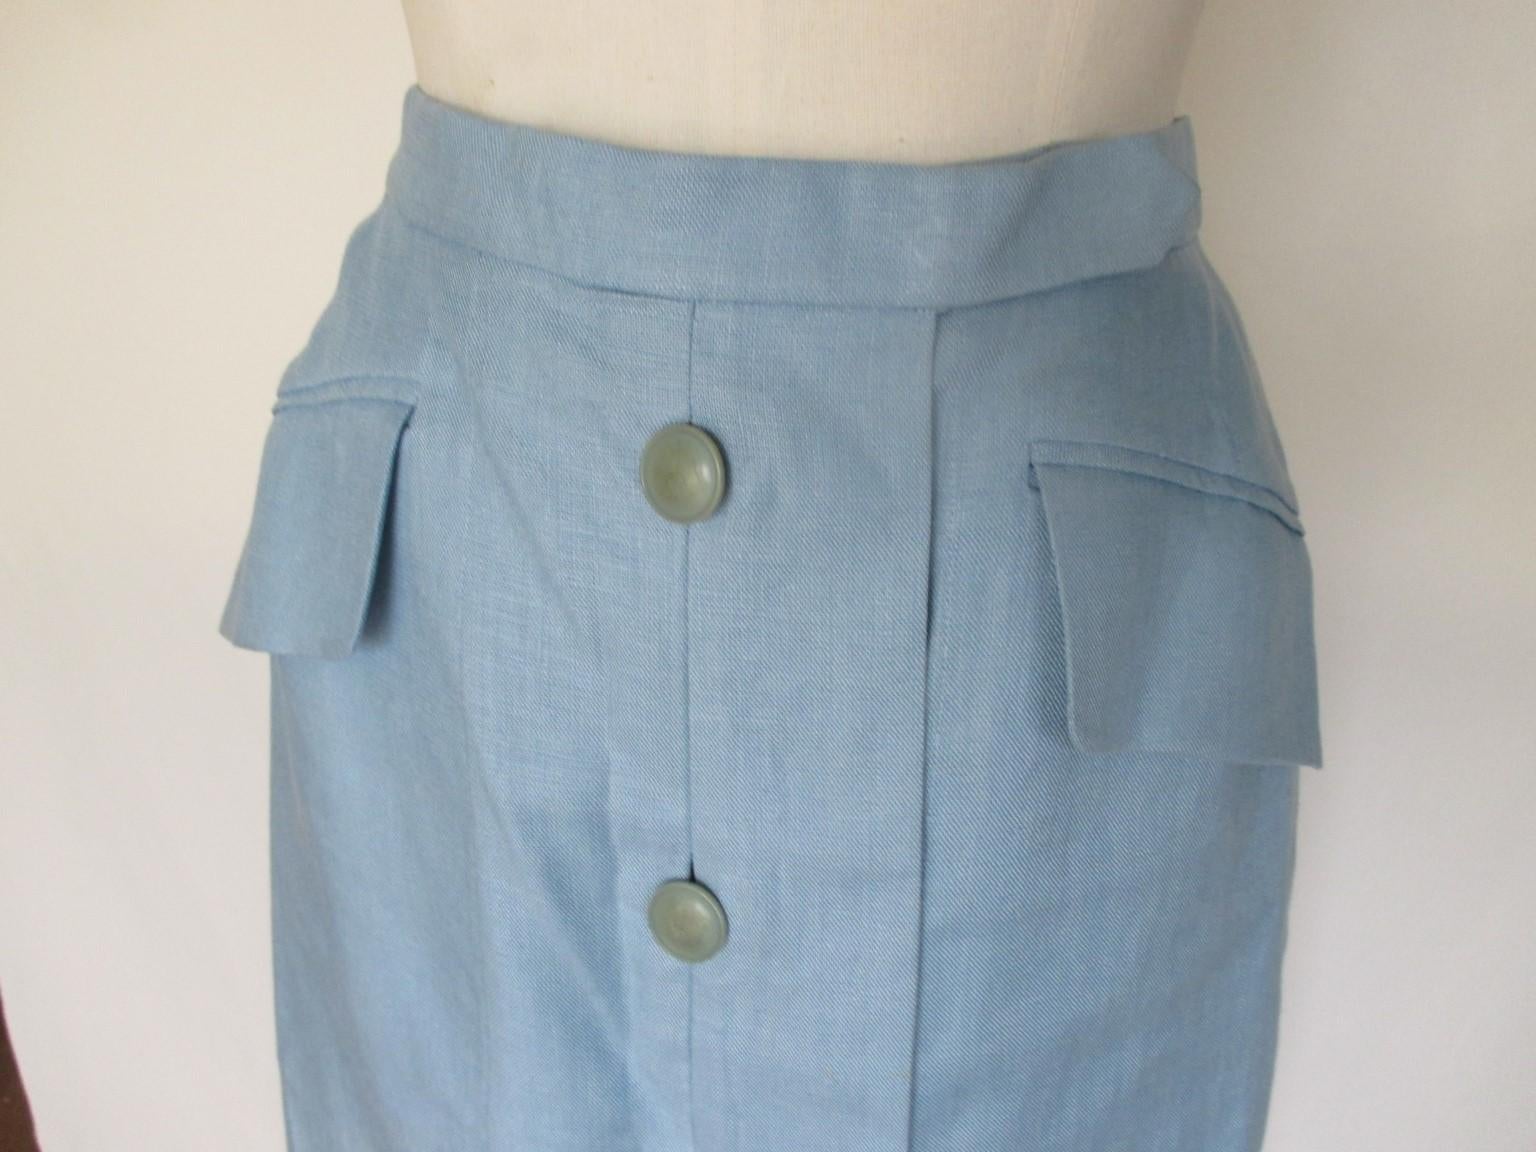 Beautiful Hermes Paris button down skirt made of 100% linen 
in the summer color, baby blue.

We offer more Hermes items, view our frontstore.

Details:
2 pockets
4 hermes logo buttons
Closing with 2 buttons and hook inside
2 extra Hermes logo